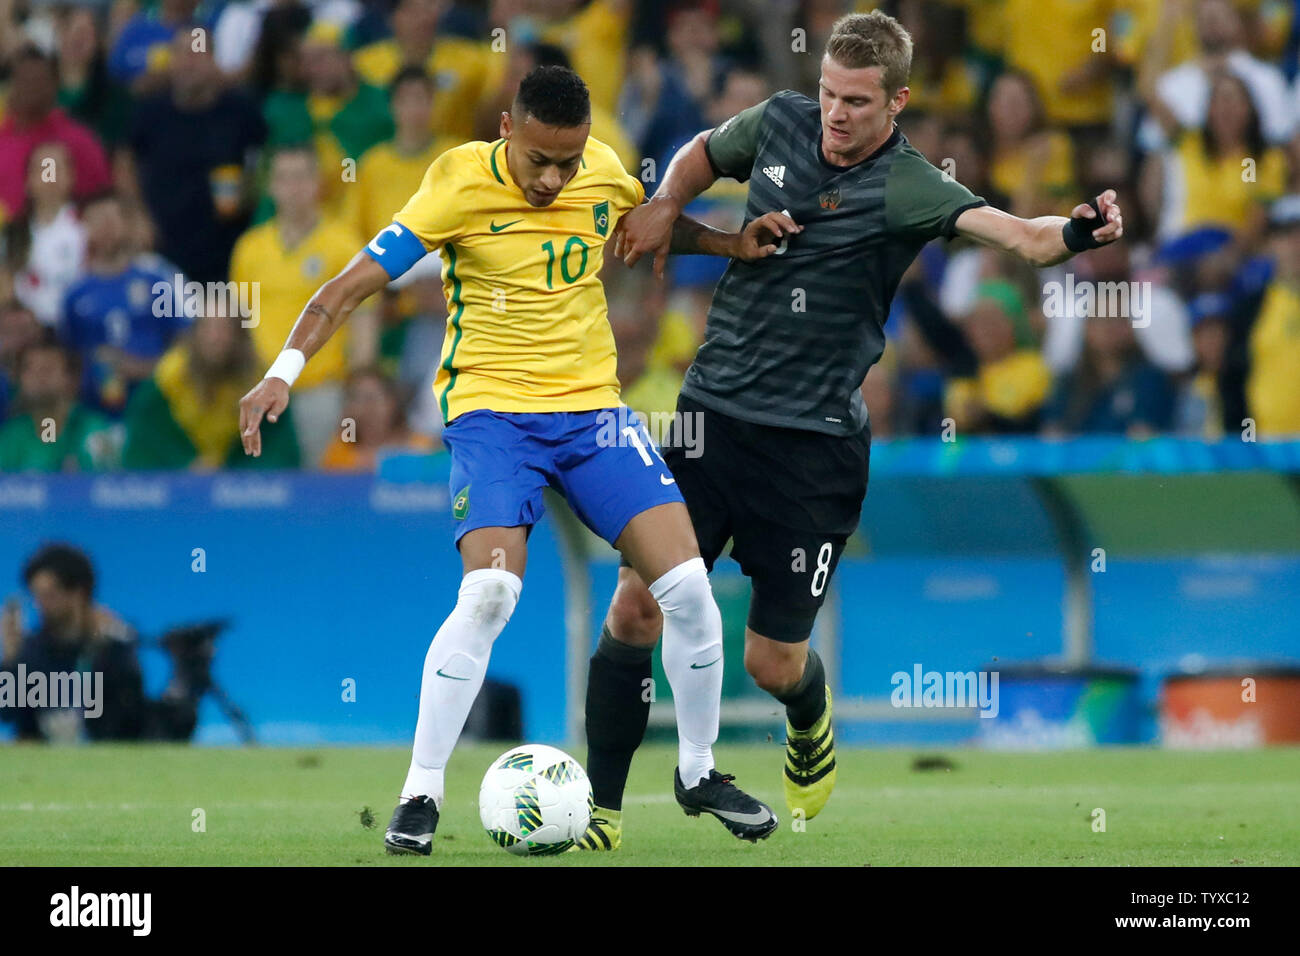 Brazil forward Neymar (10) and German midfielder Lars Bender (8) battle for a ball in the first half of the Men's Gold Medal soccer match at the 2016 Rio Summer Olympics in Rio de Janeiro, Brazil, on August 20, 2016.    Photo by Matthew Healey/UPI Stock Photo